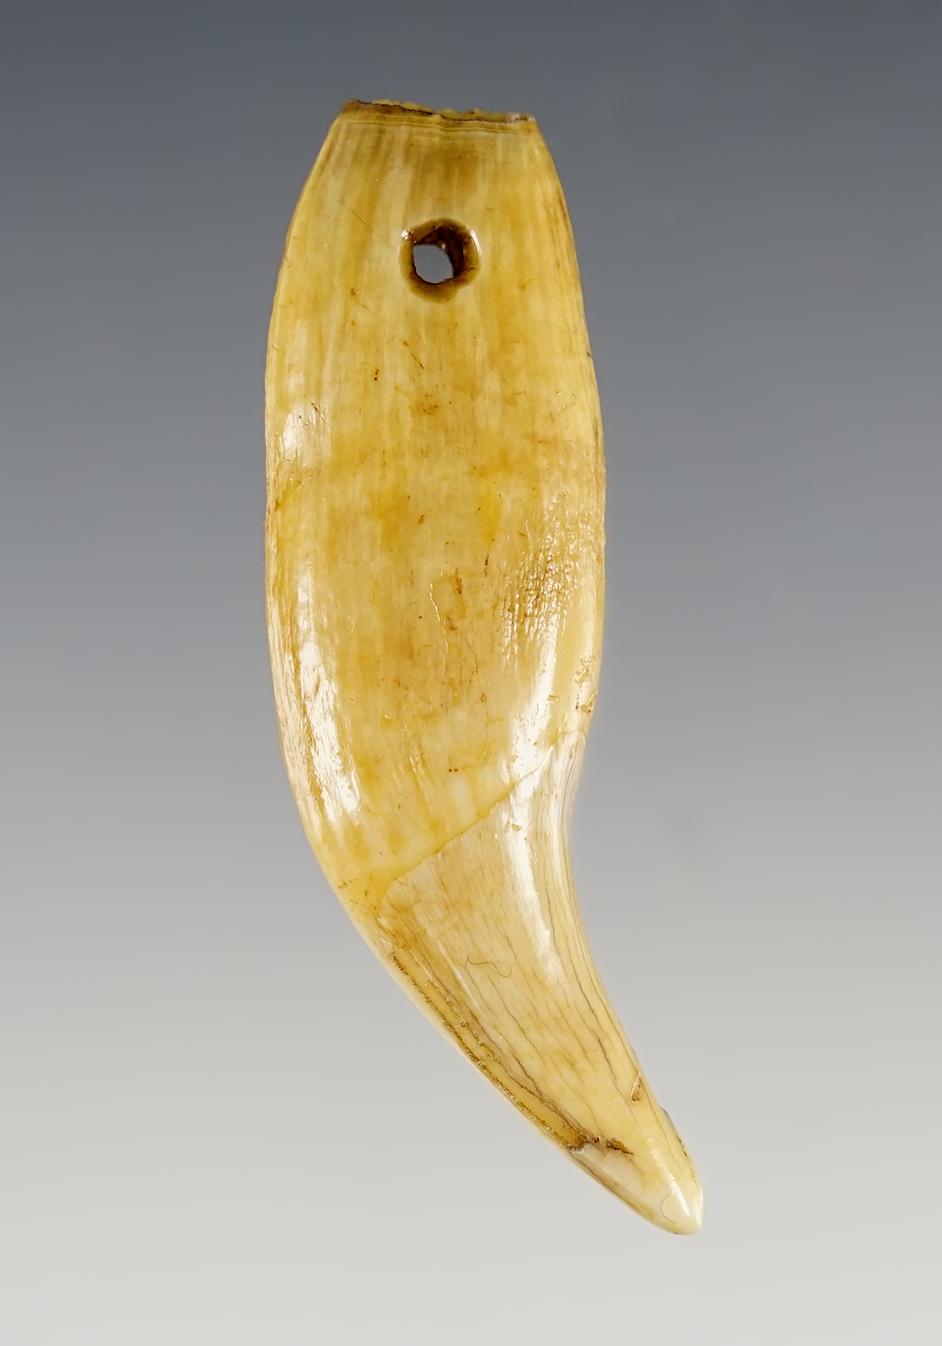 2 3/4" Bear Tooth recovered at Genoa Fort in Genoa, New York.